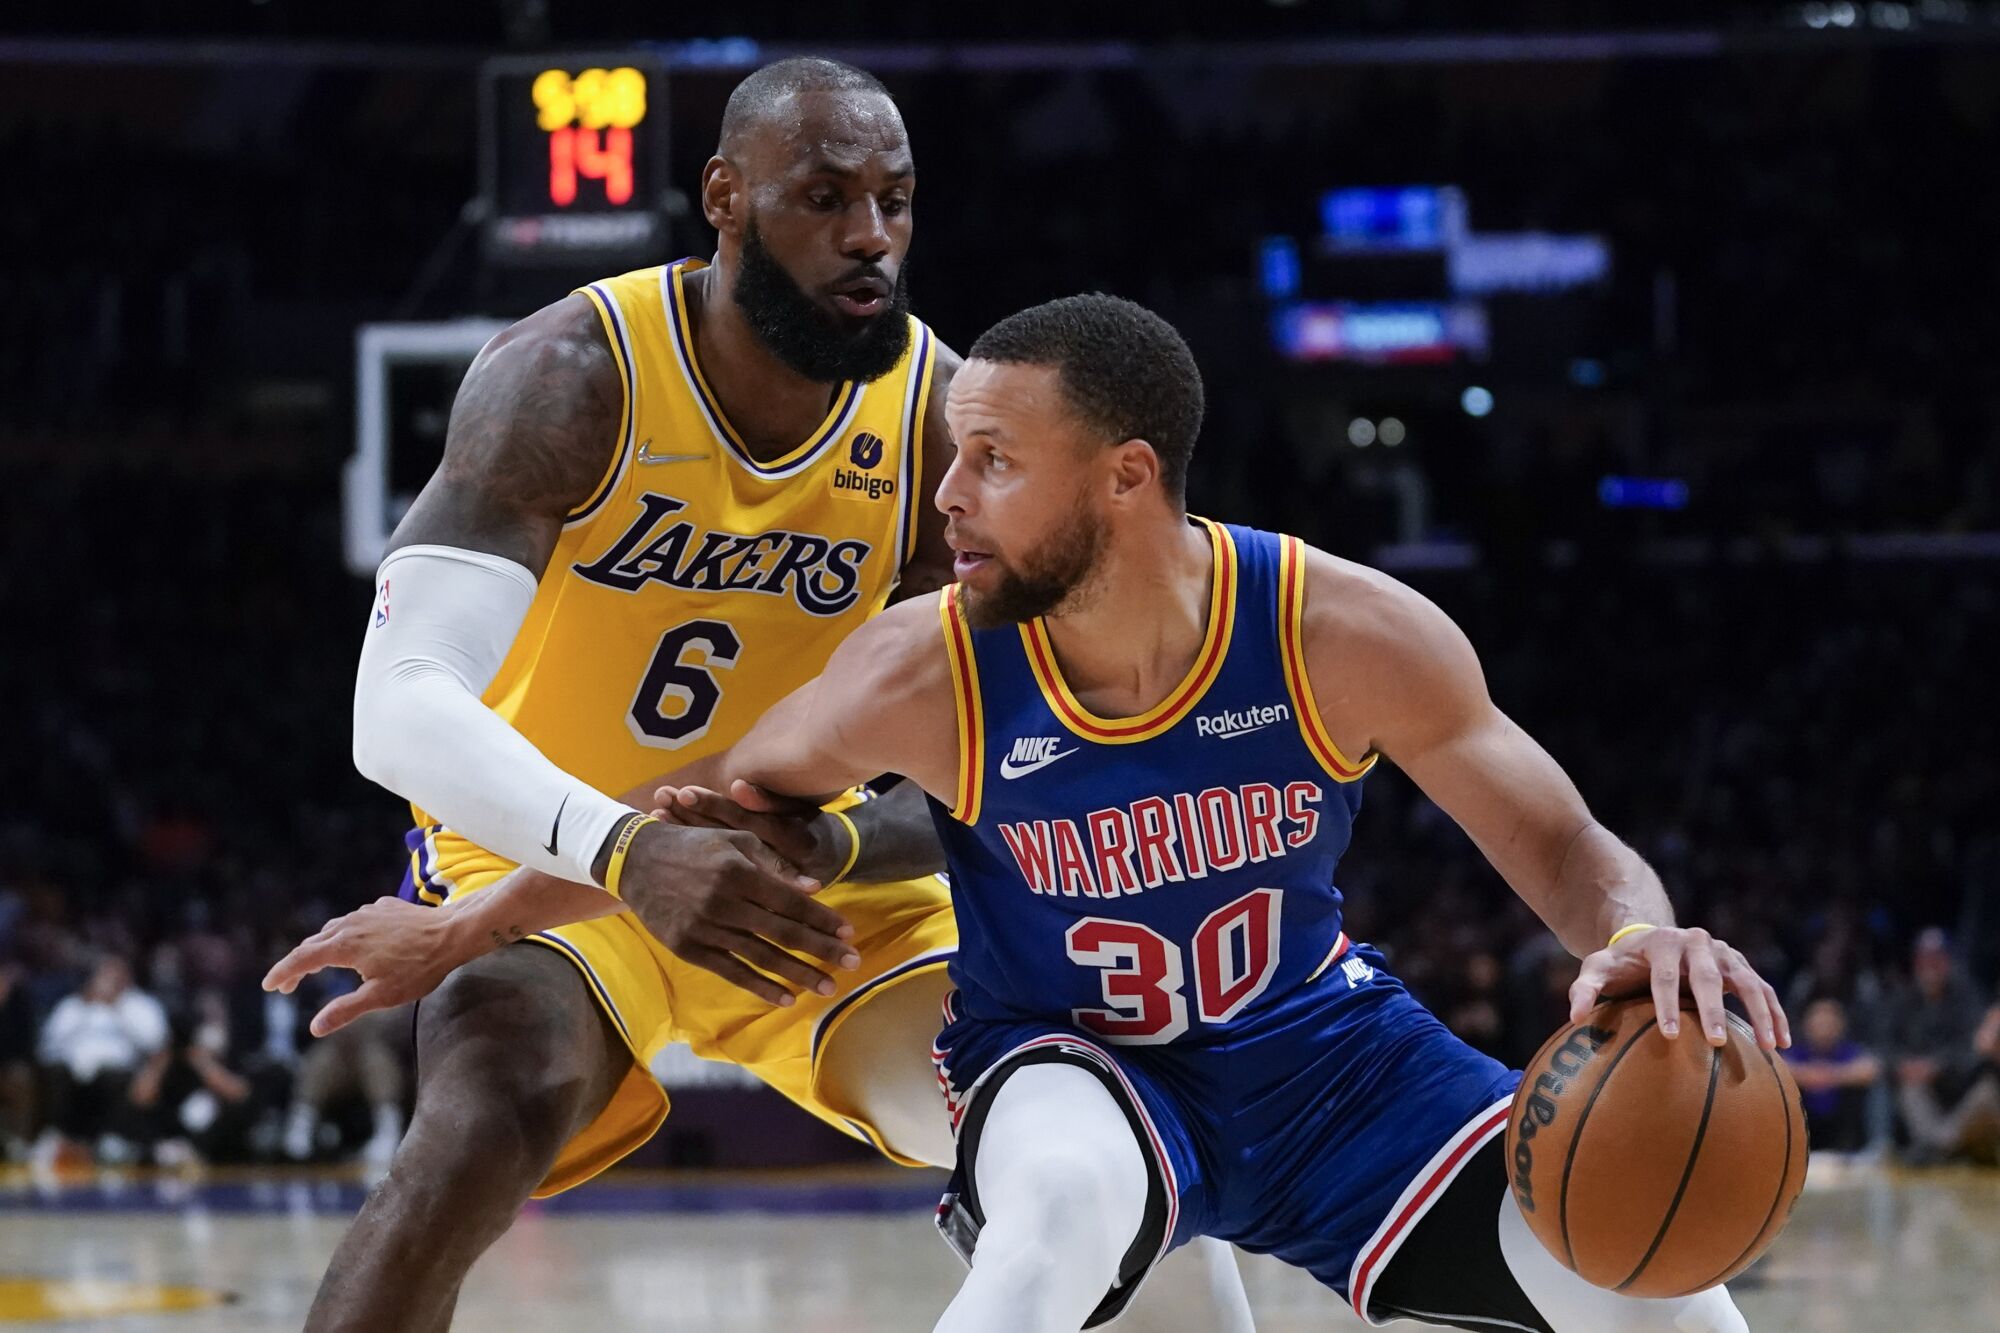 Lakers forward LeBron James pressures Warriors guard Stephen Curry along the baseline.